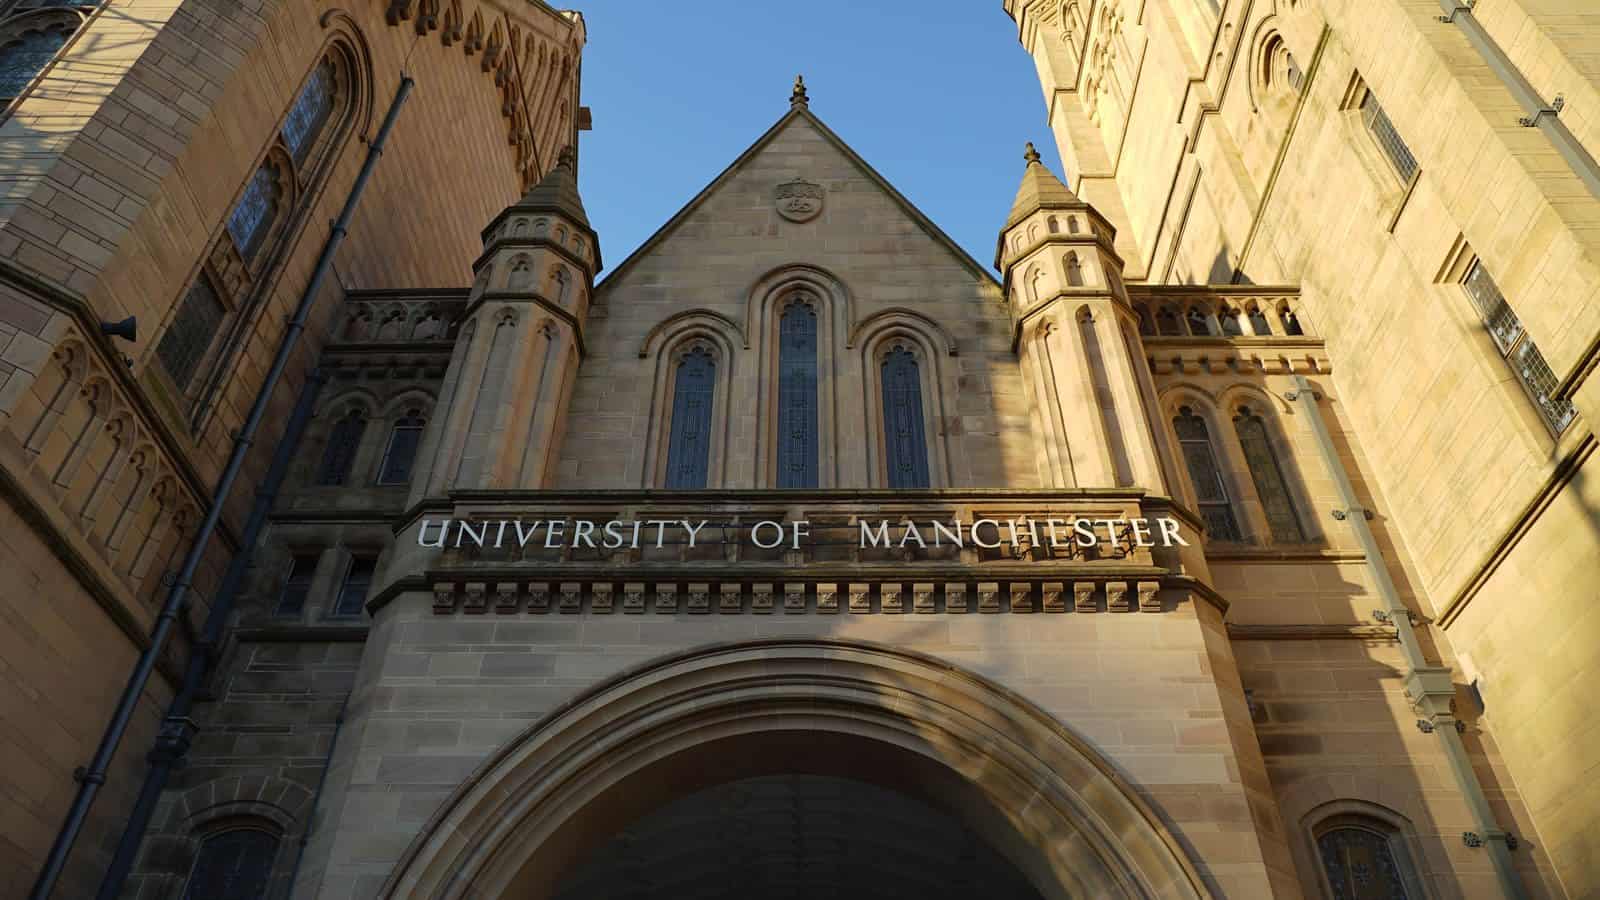 A photo of the University of Manchester.